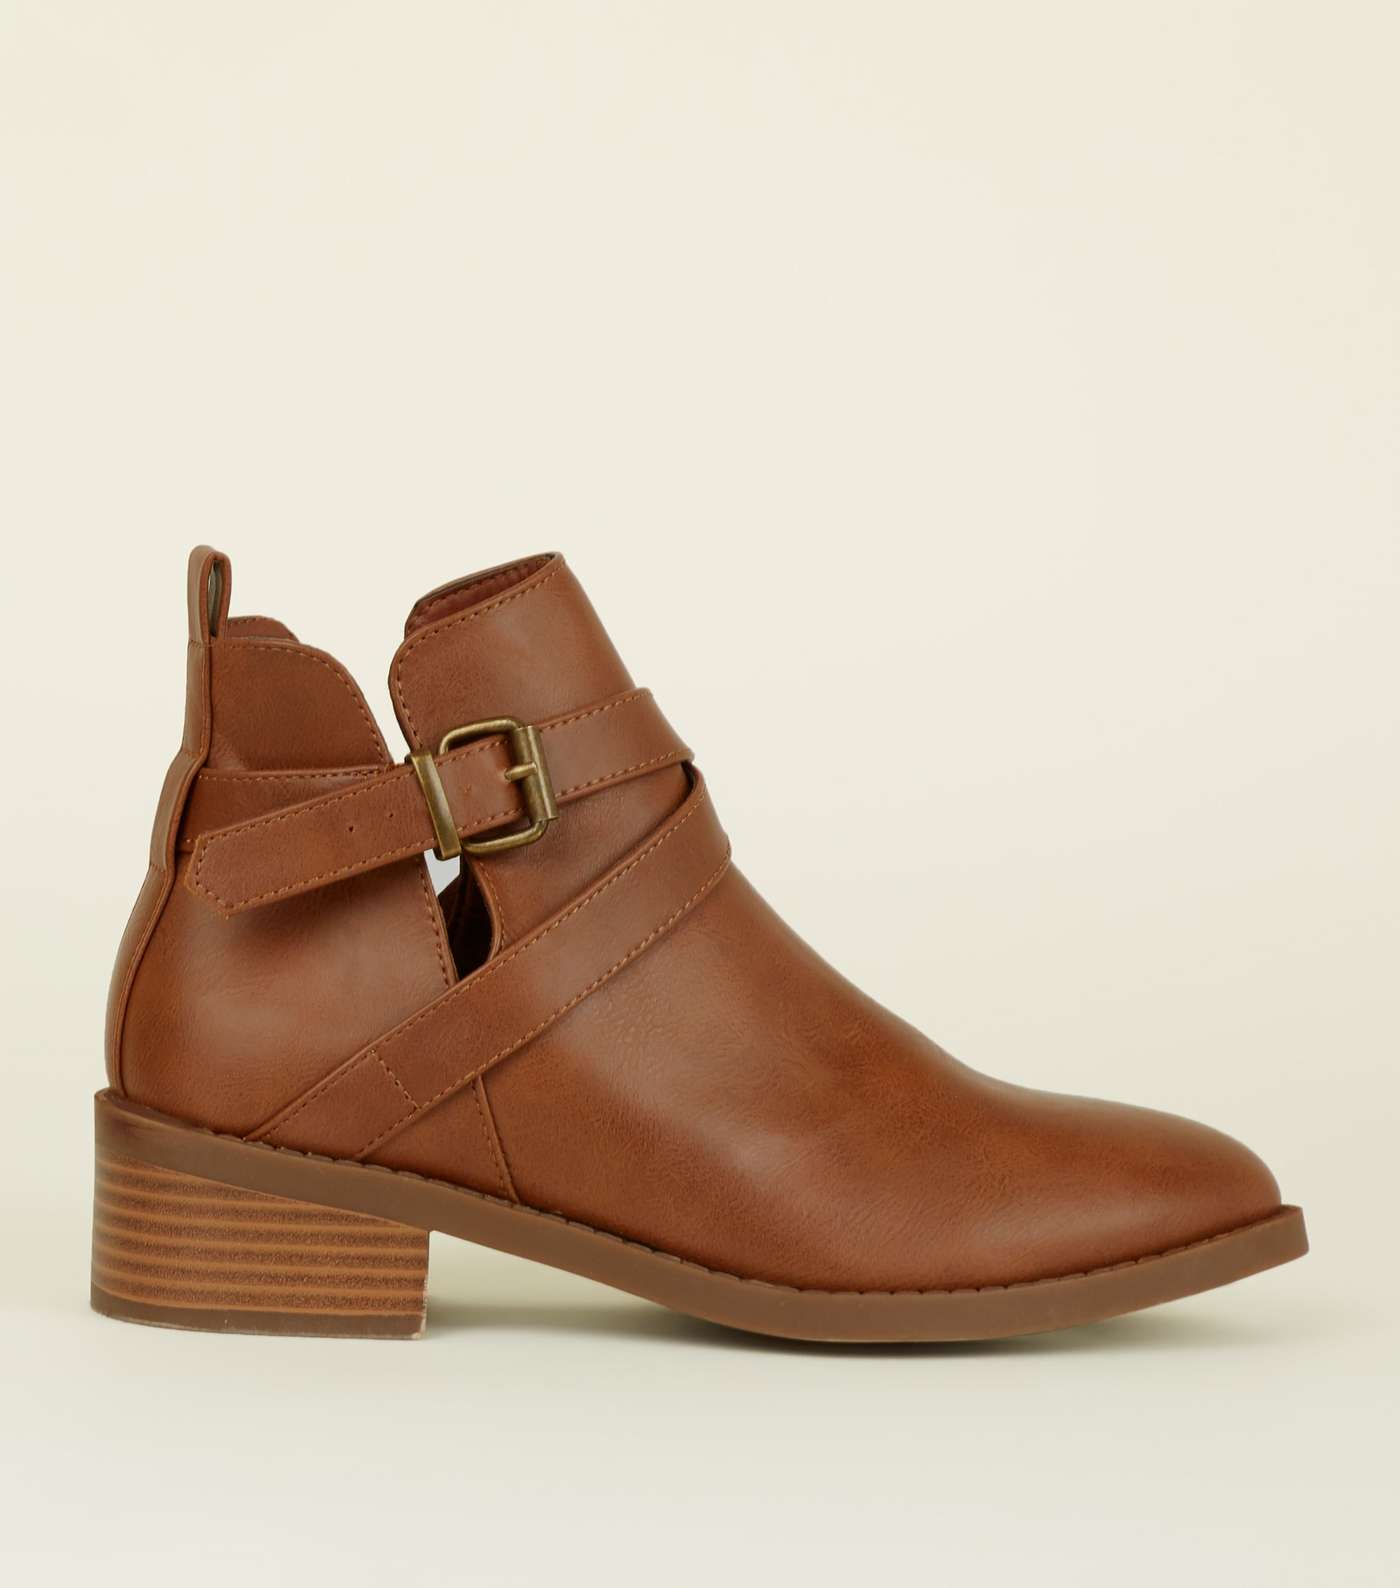 Girls Tan Leather-Look Cut-Out Ankle Boots 